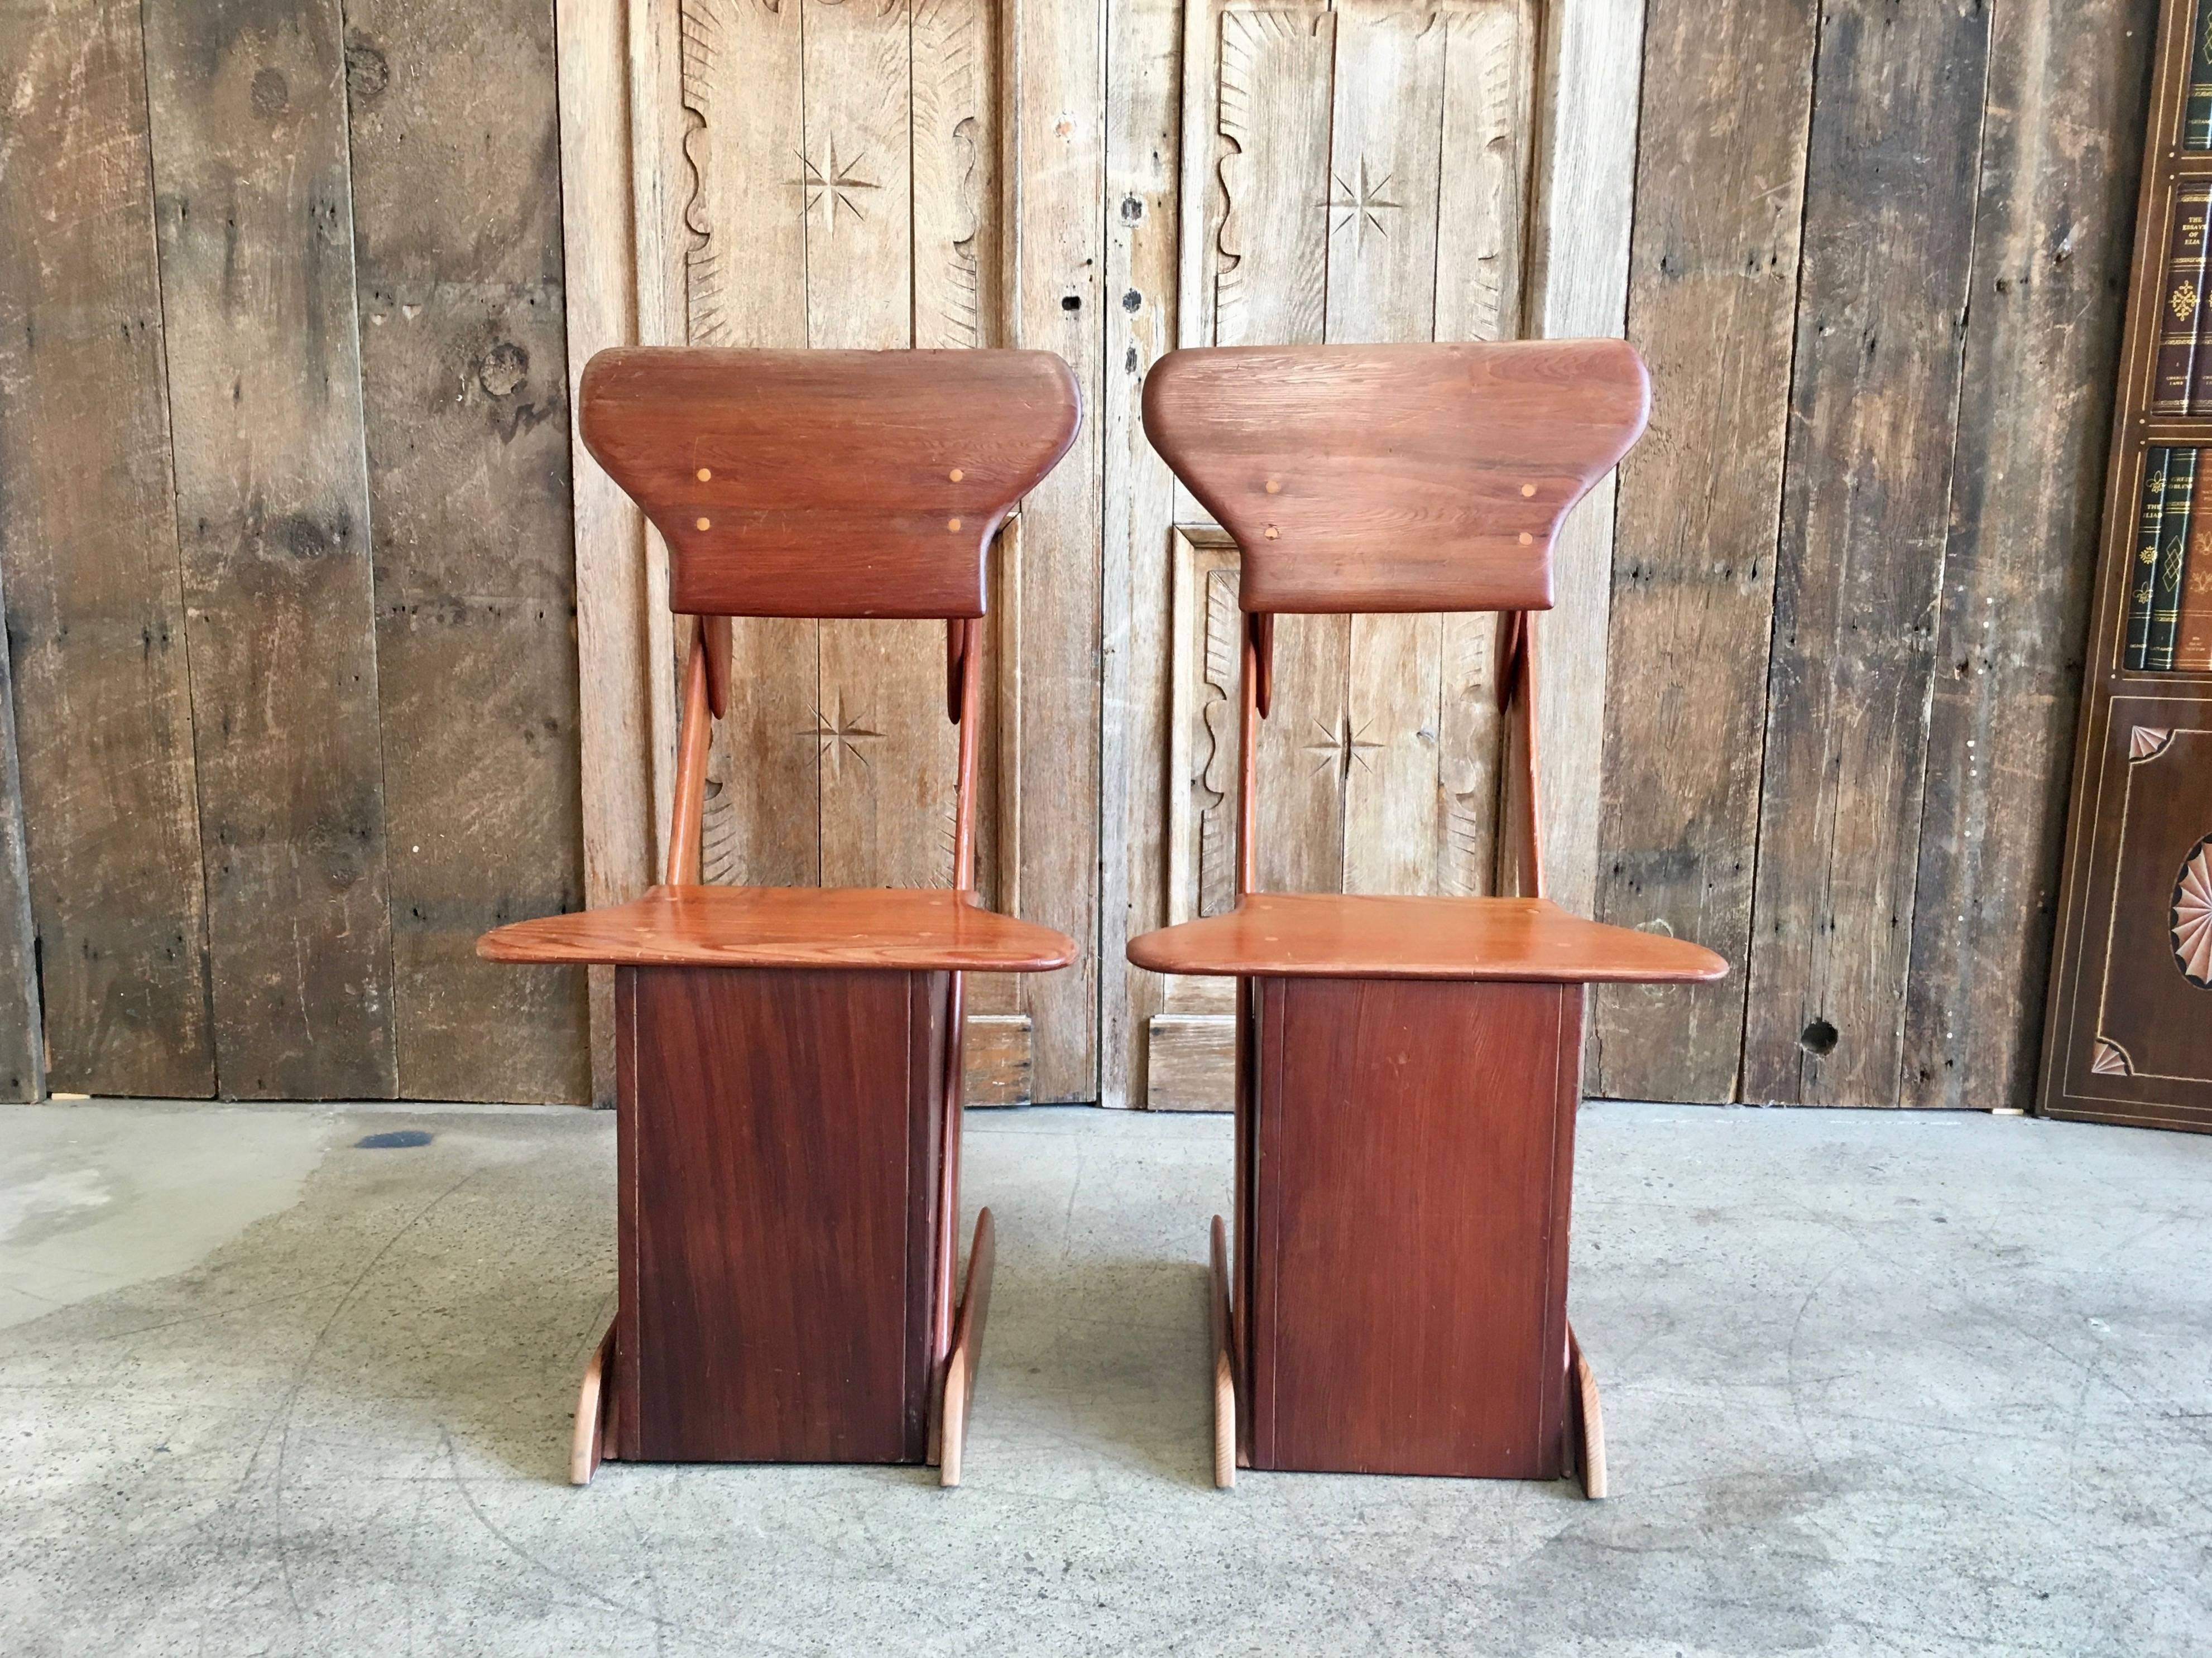 Rustic worn pine Mid-Century Modern chairs with that alpine chalet feel.